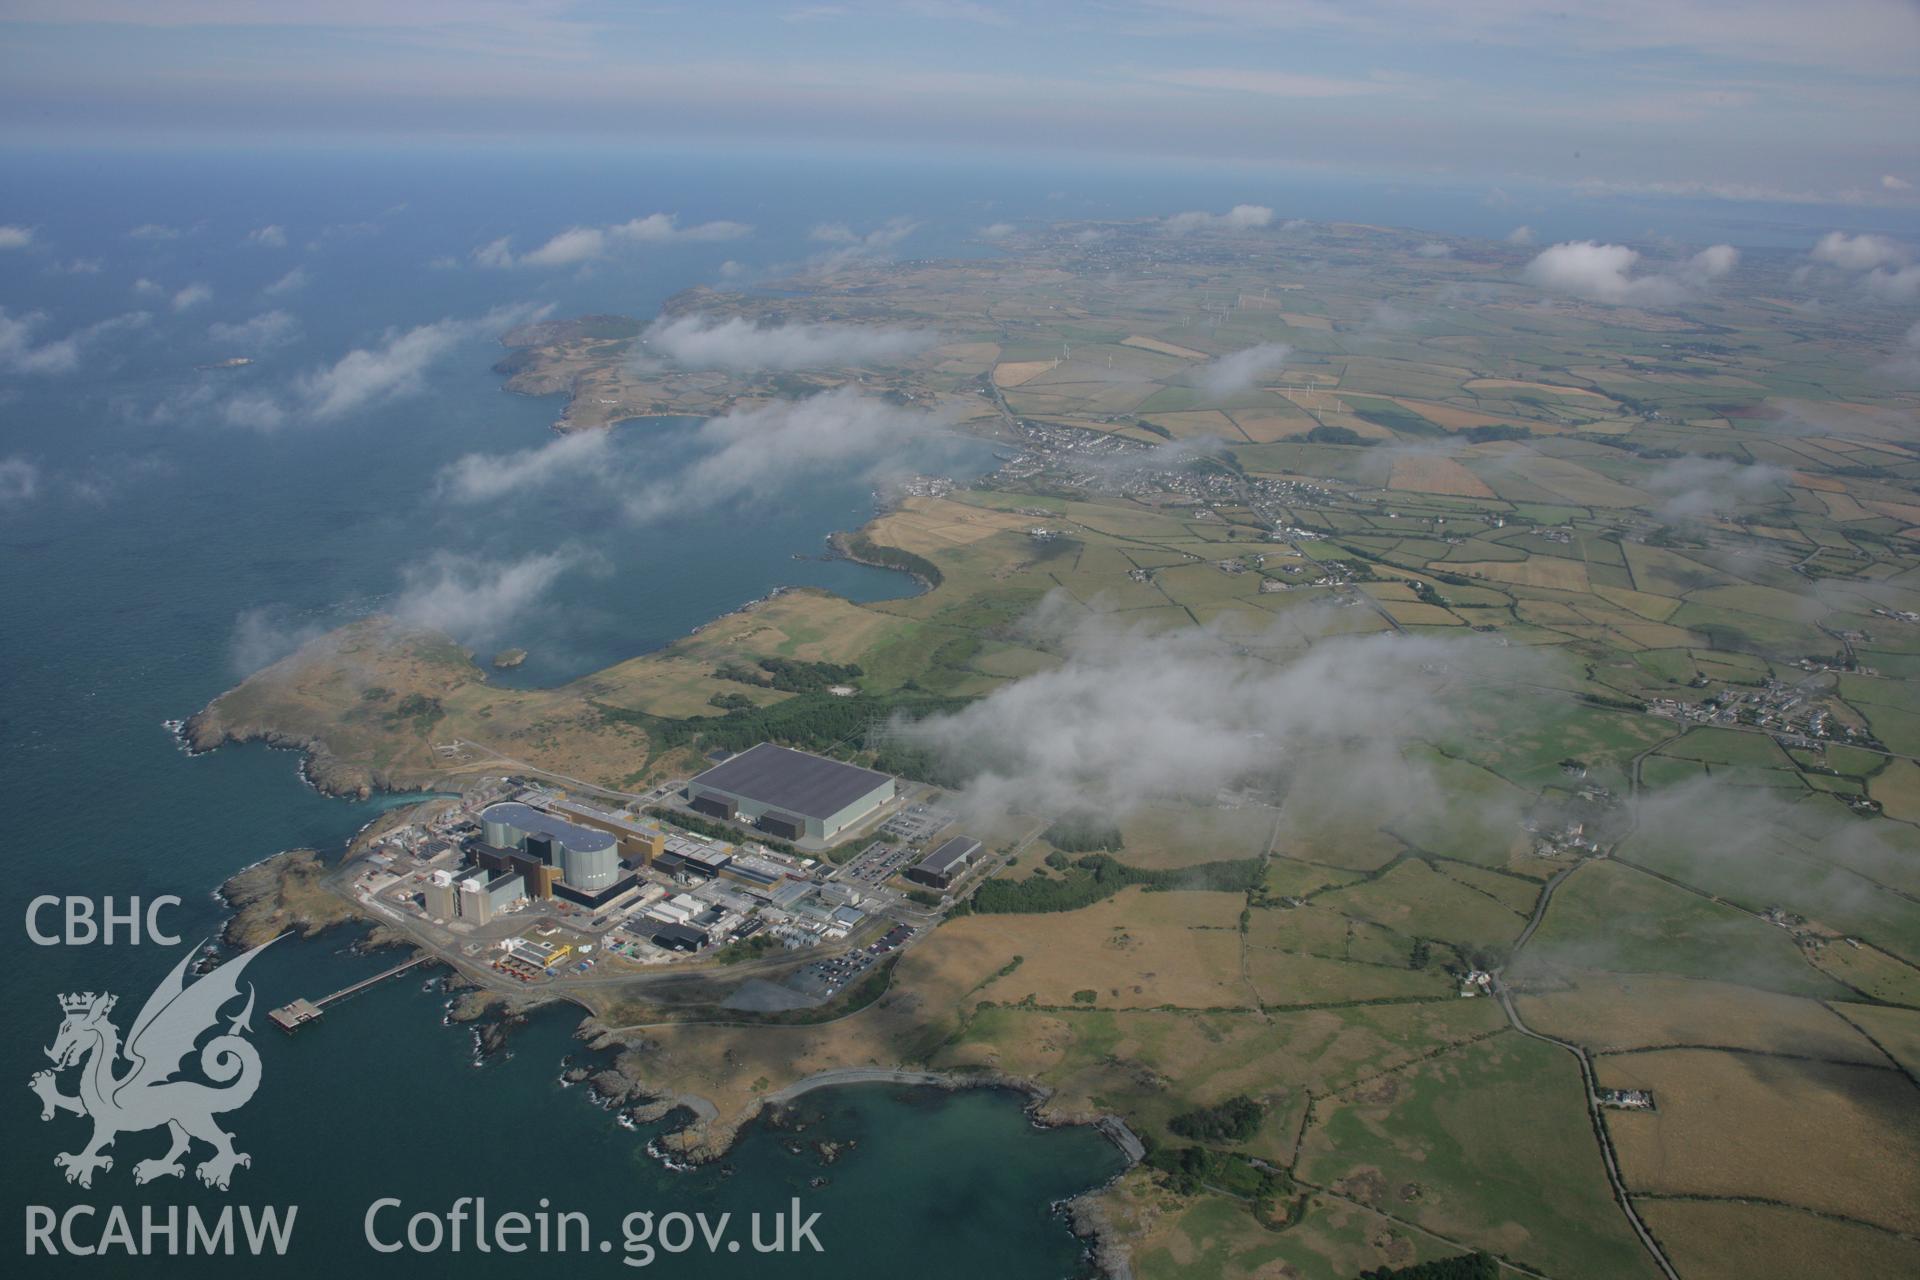 RCAHMW colour oblique aerial photograph of Wylfa Nuclear Power Station. A high landscape view. Taken on 14 August 2006 by Toby Driver.